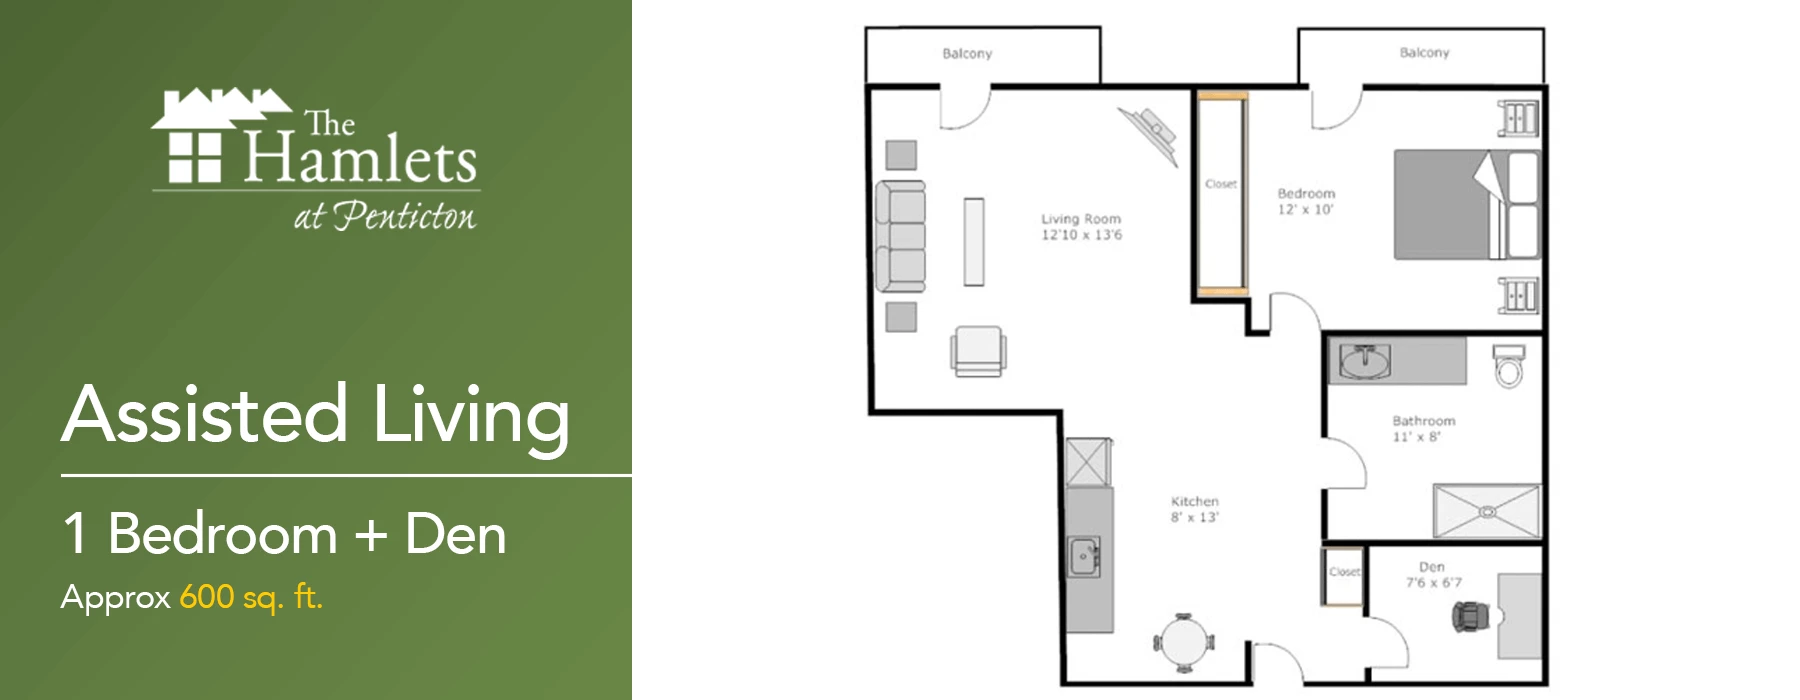 One bedroom with a den plan senior apartments example